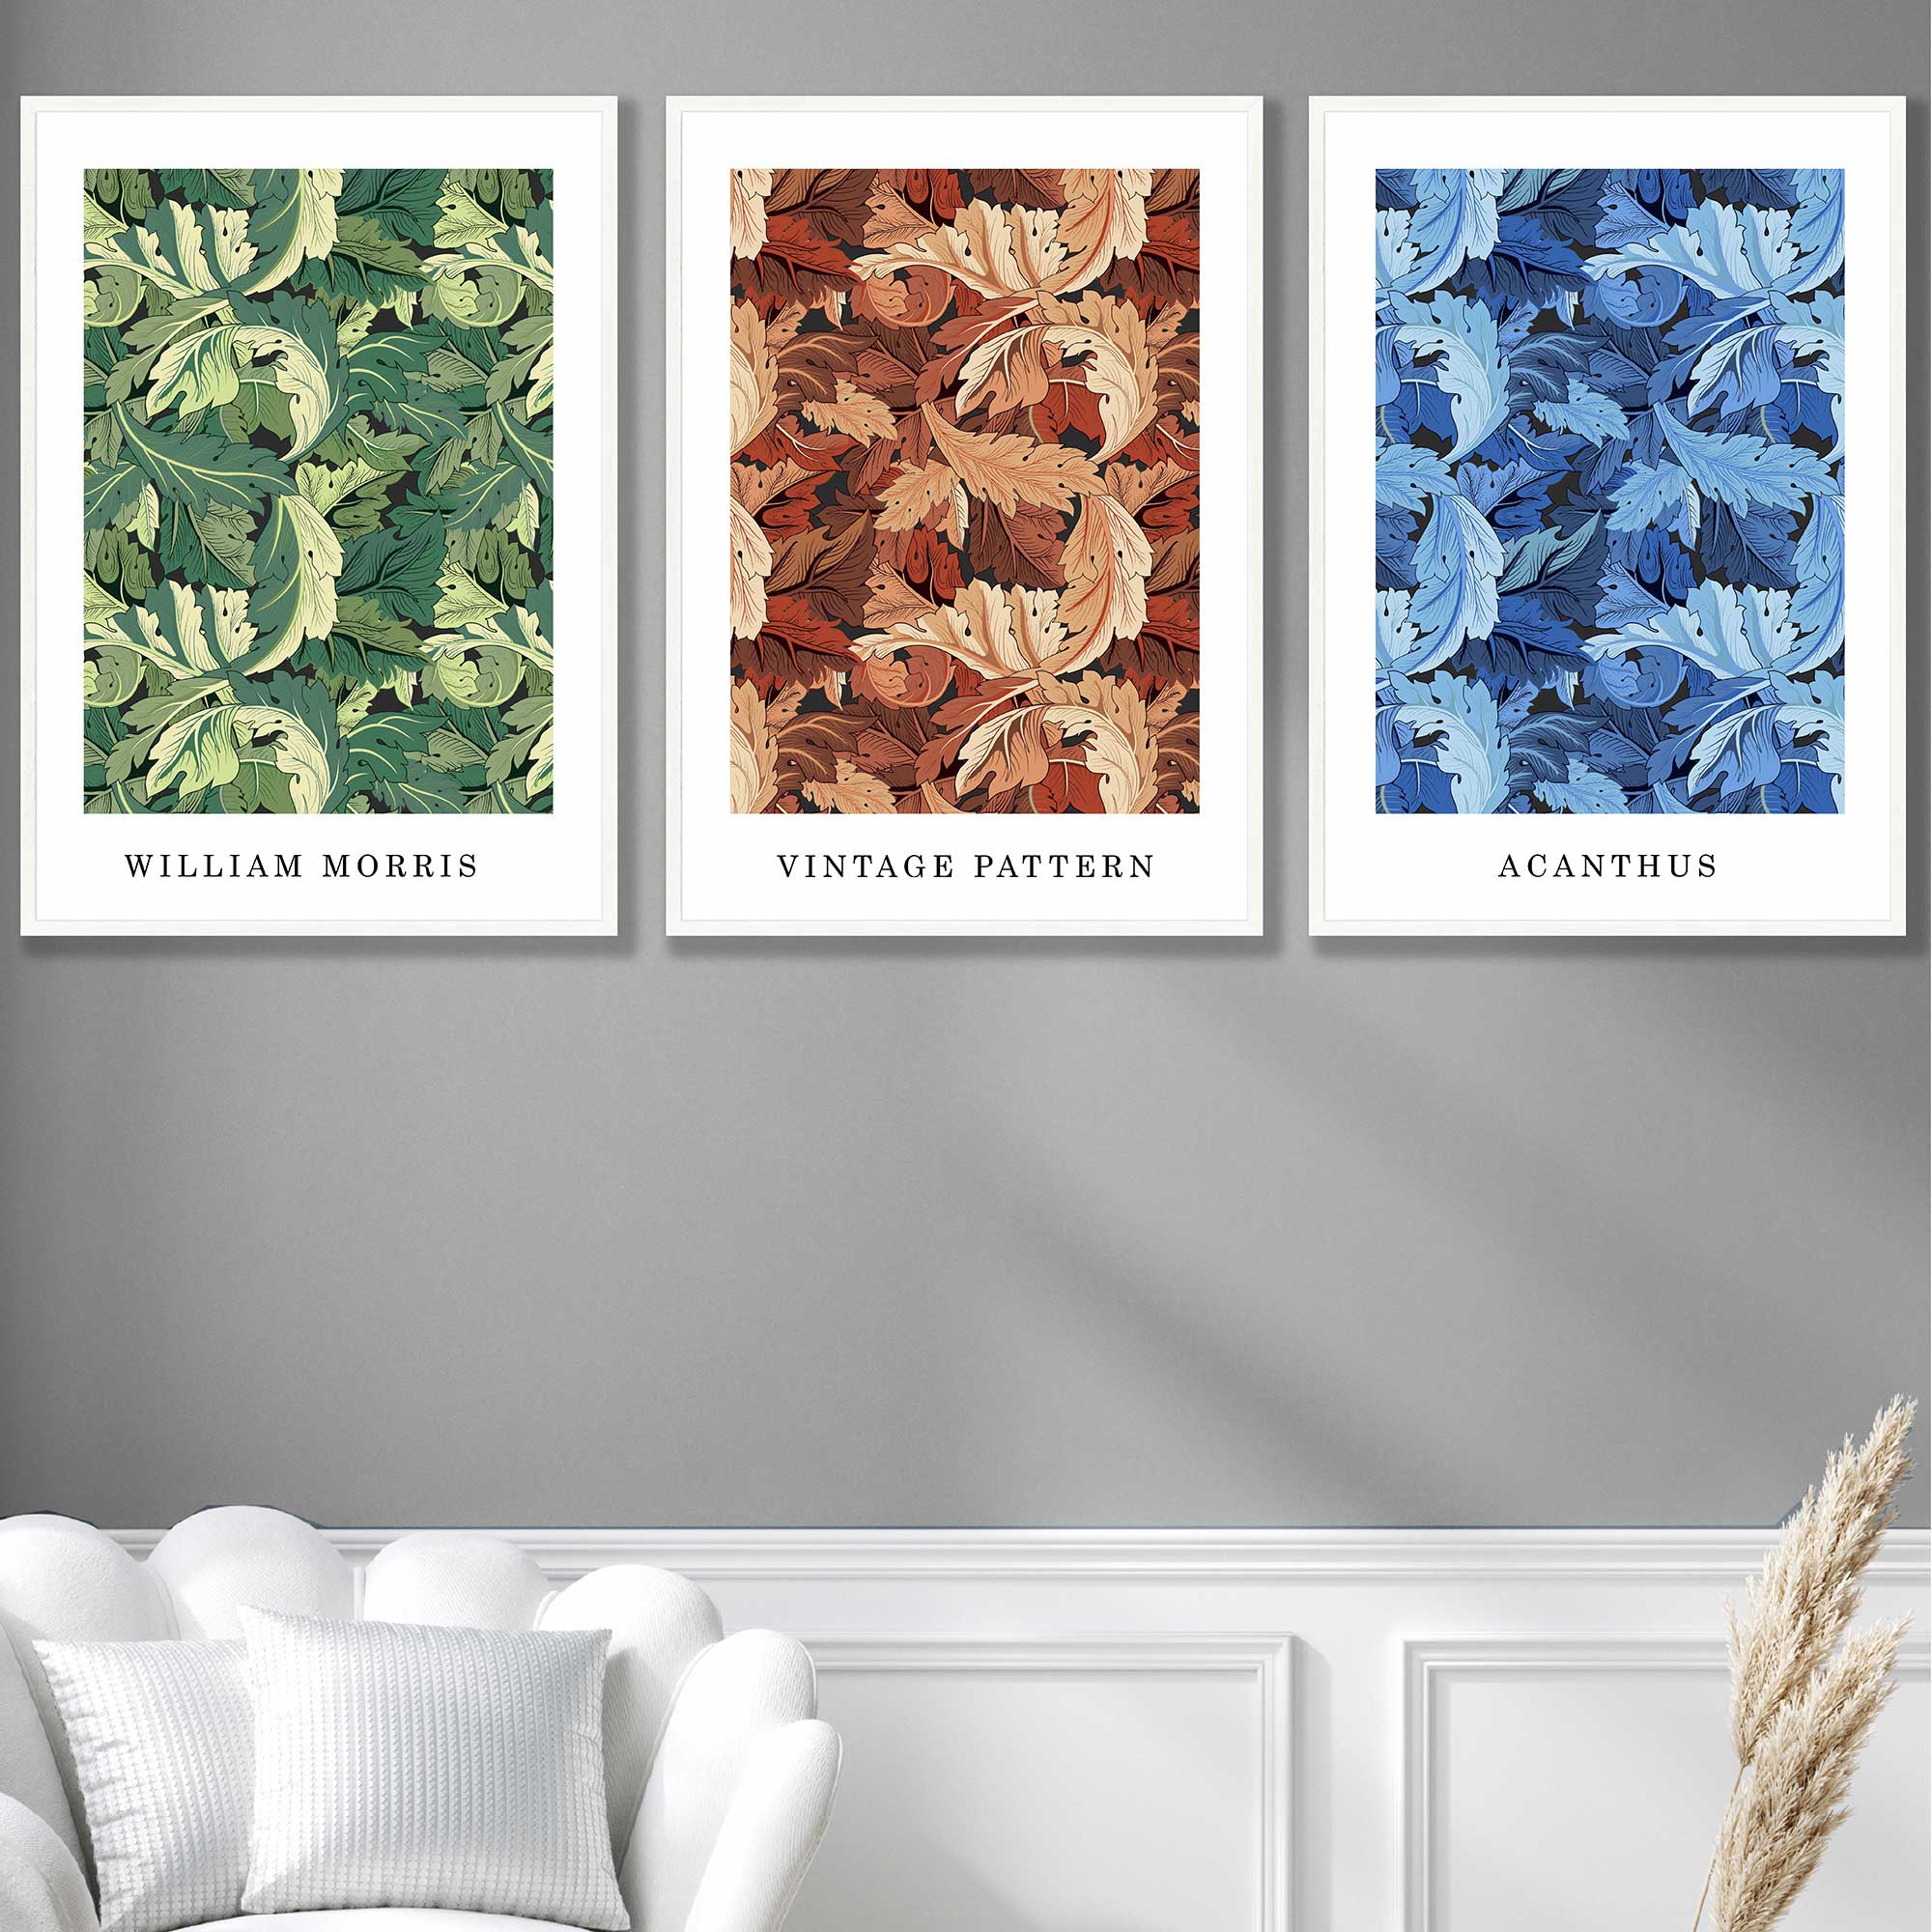 William Morris Vintage Floral Wall Art Prints in Blue Green and Tan